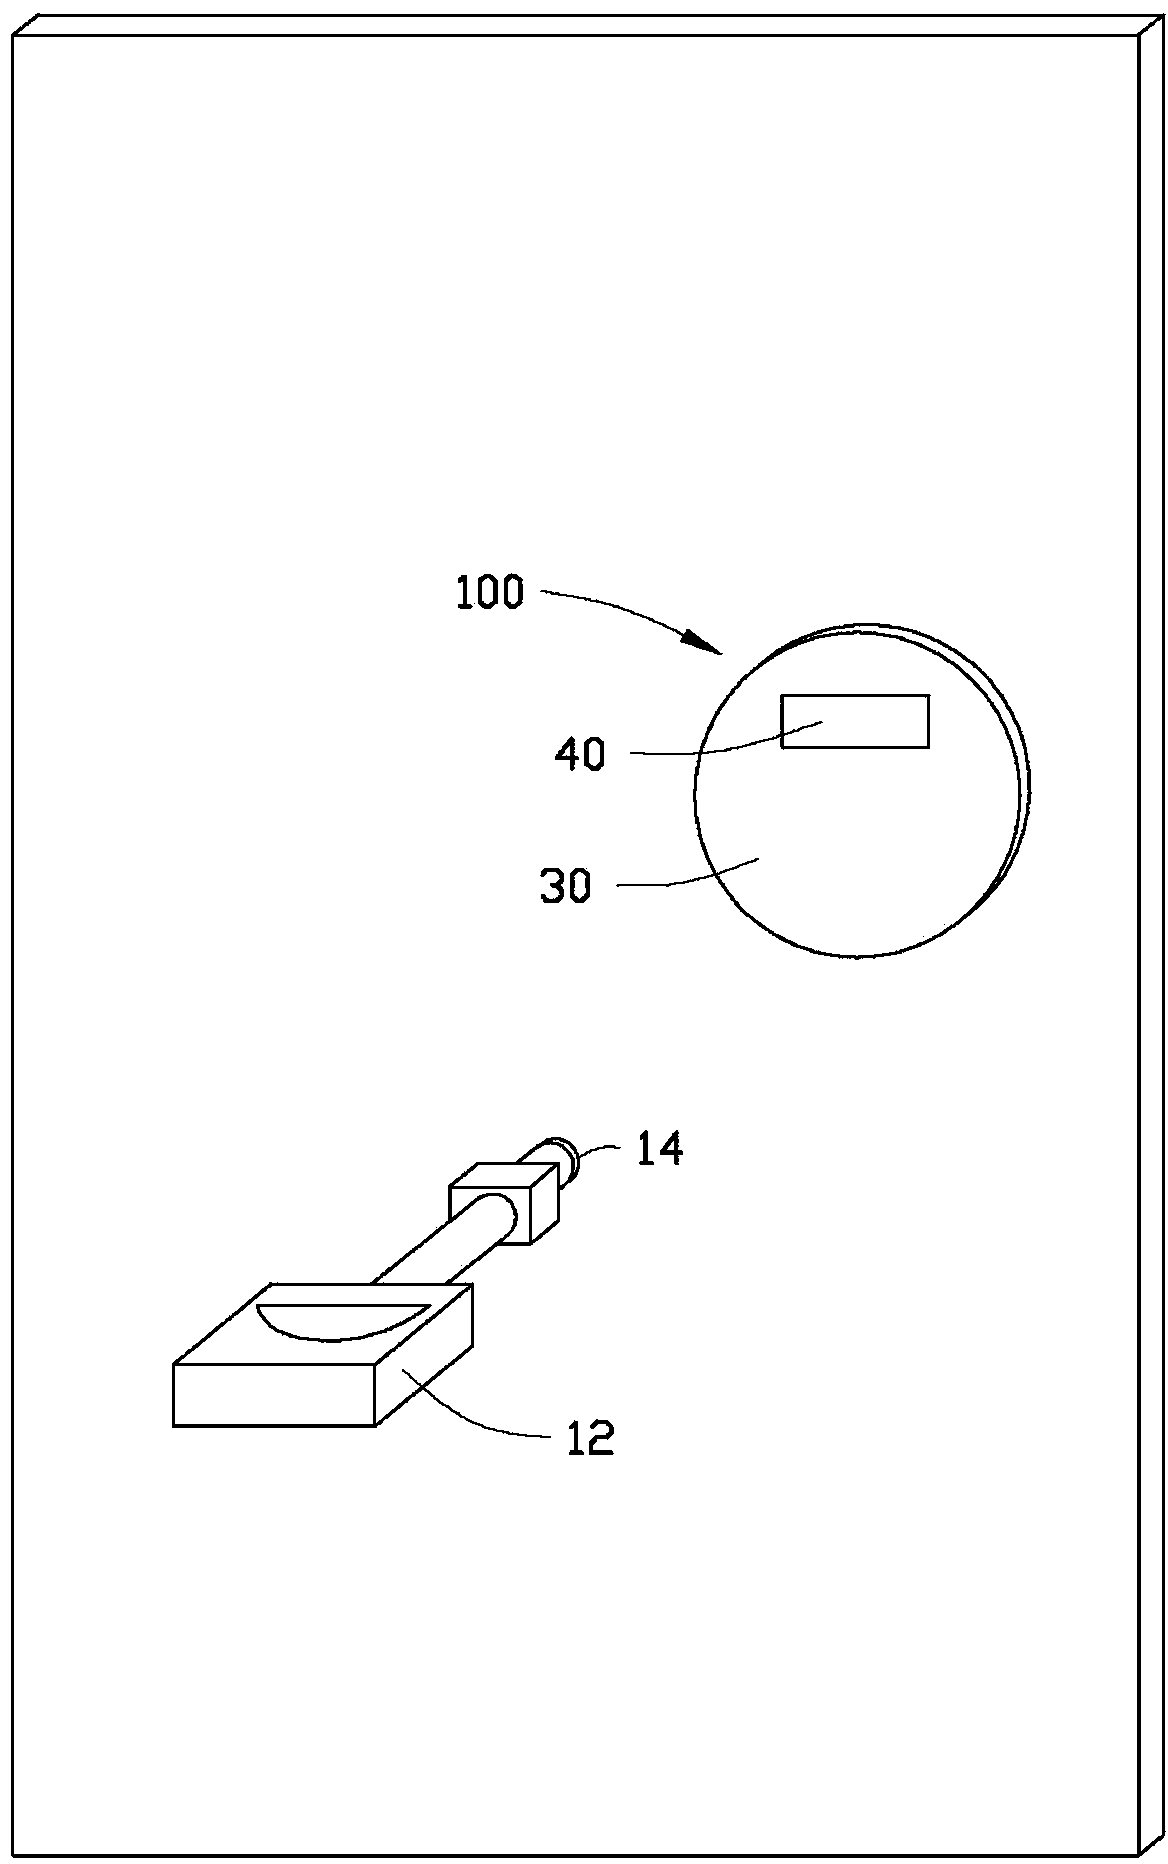 Switching device and method of opening the switching device